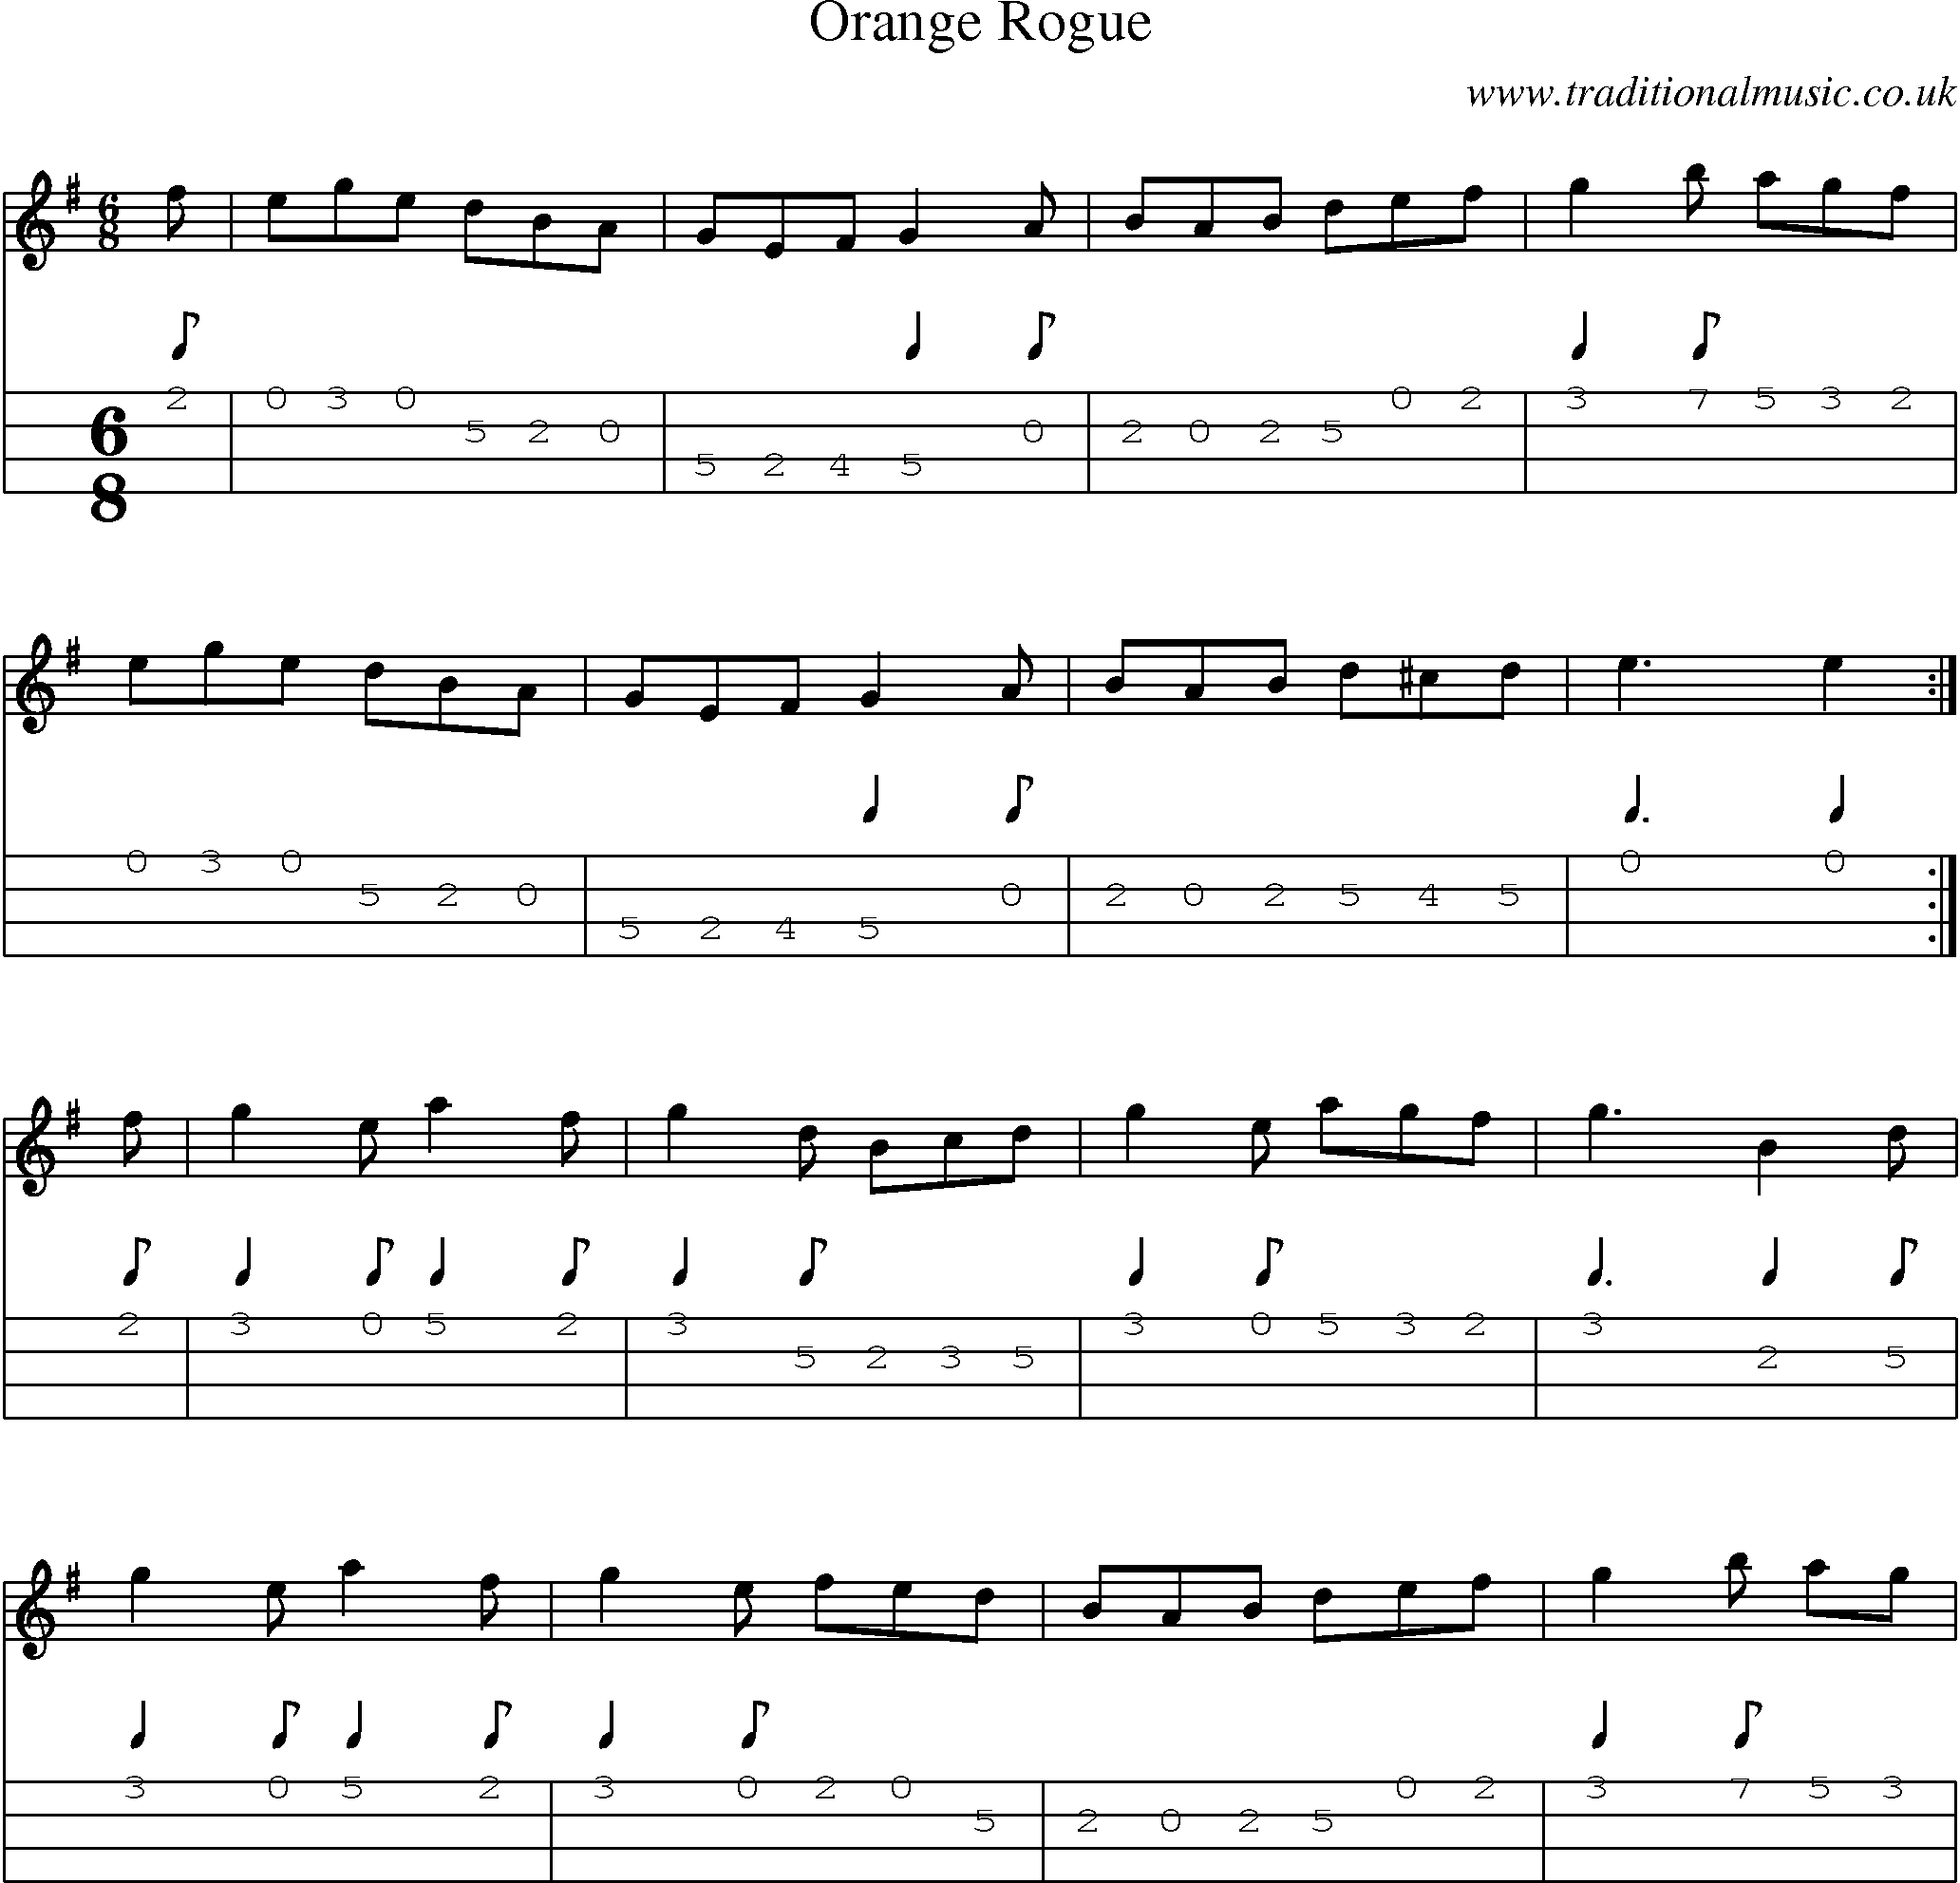 Music Score and Mandolin Tabs for Orange Rogue